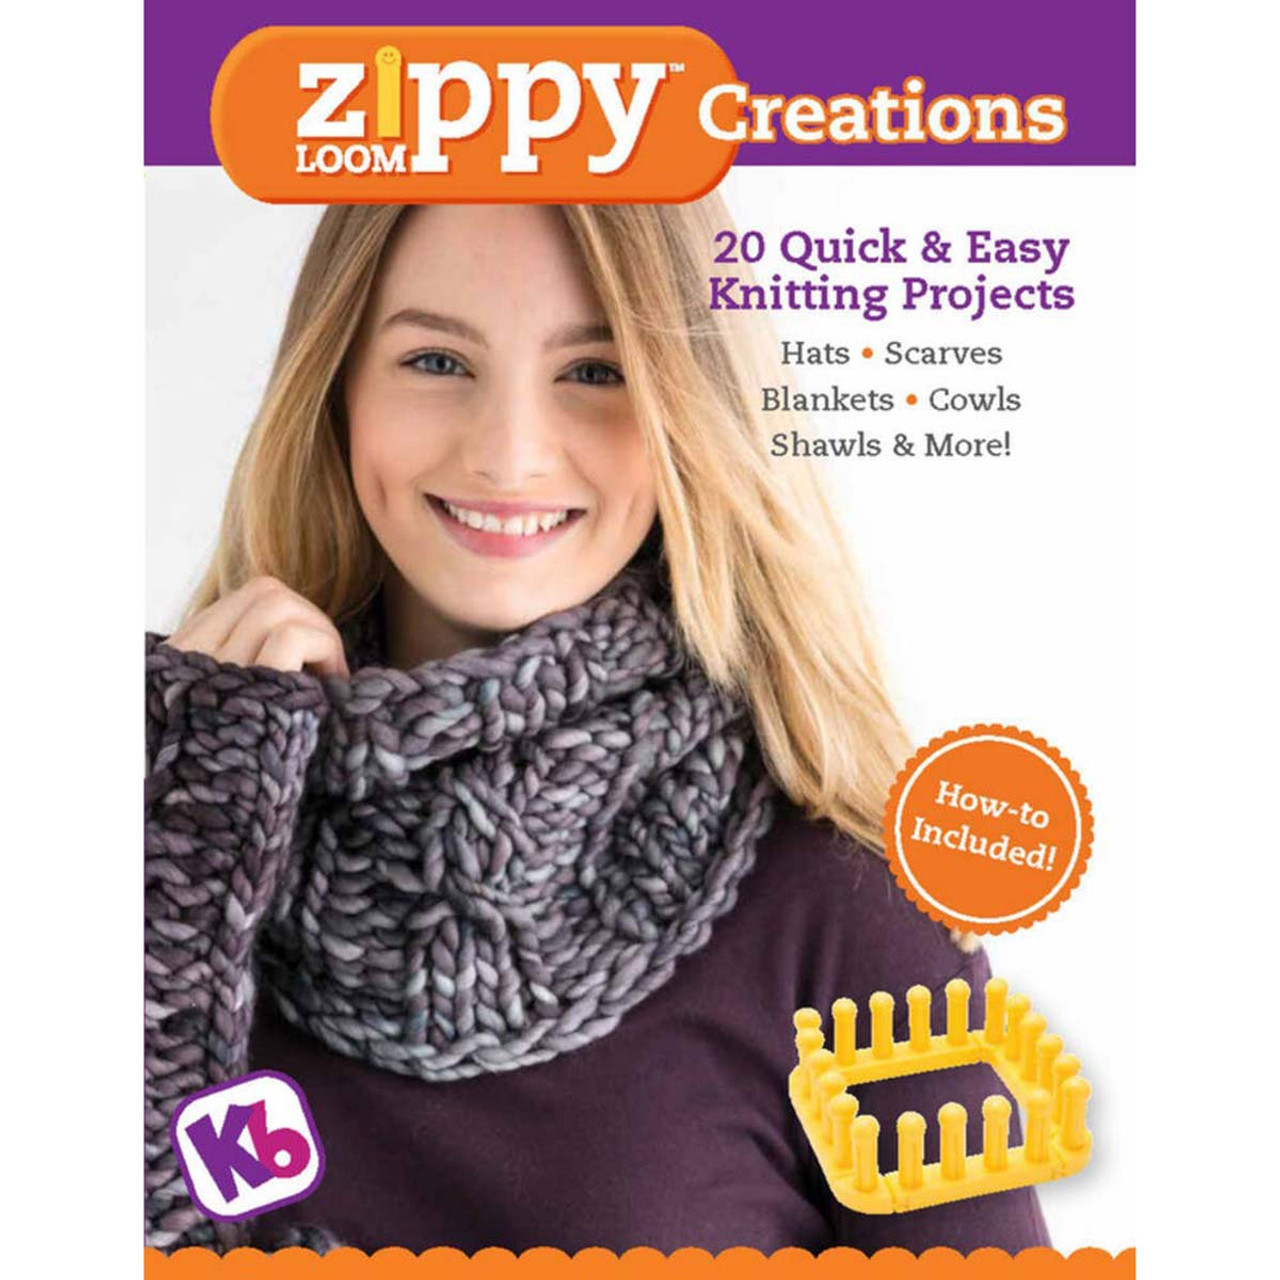 Zippy Loom Creations: 20 Quick & Easy Knitting Projects Book